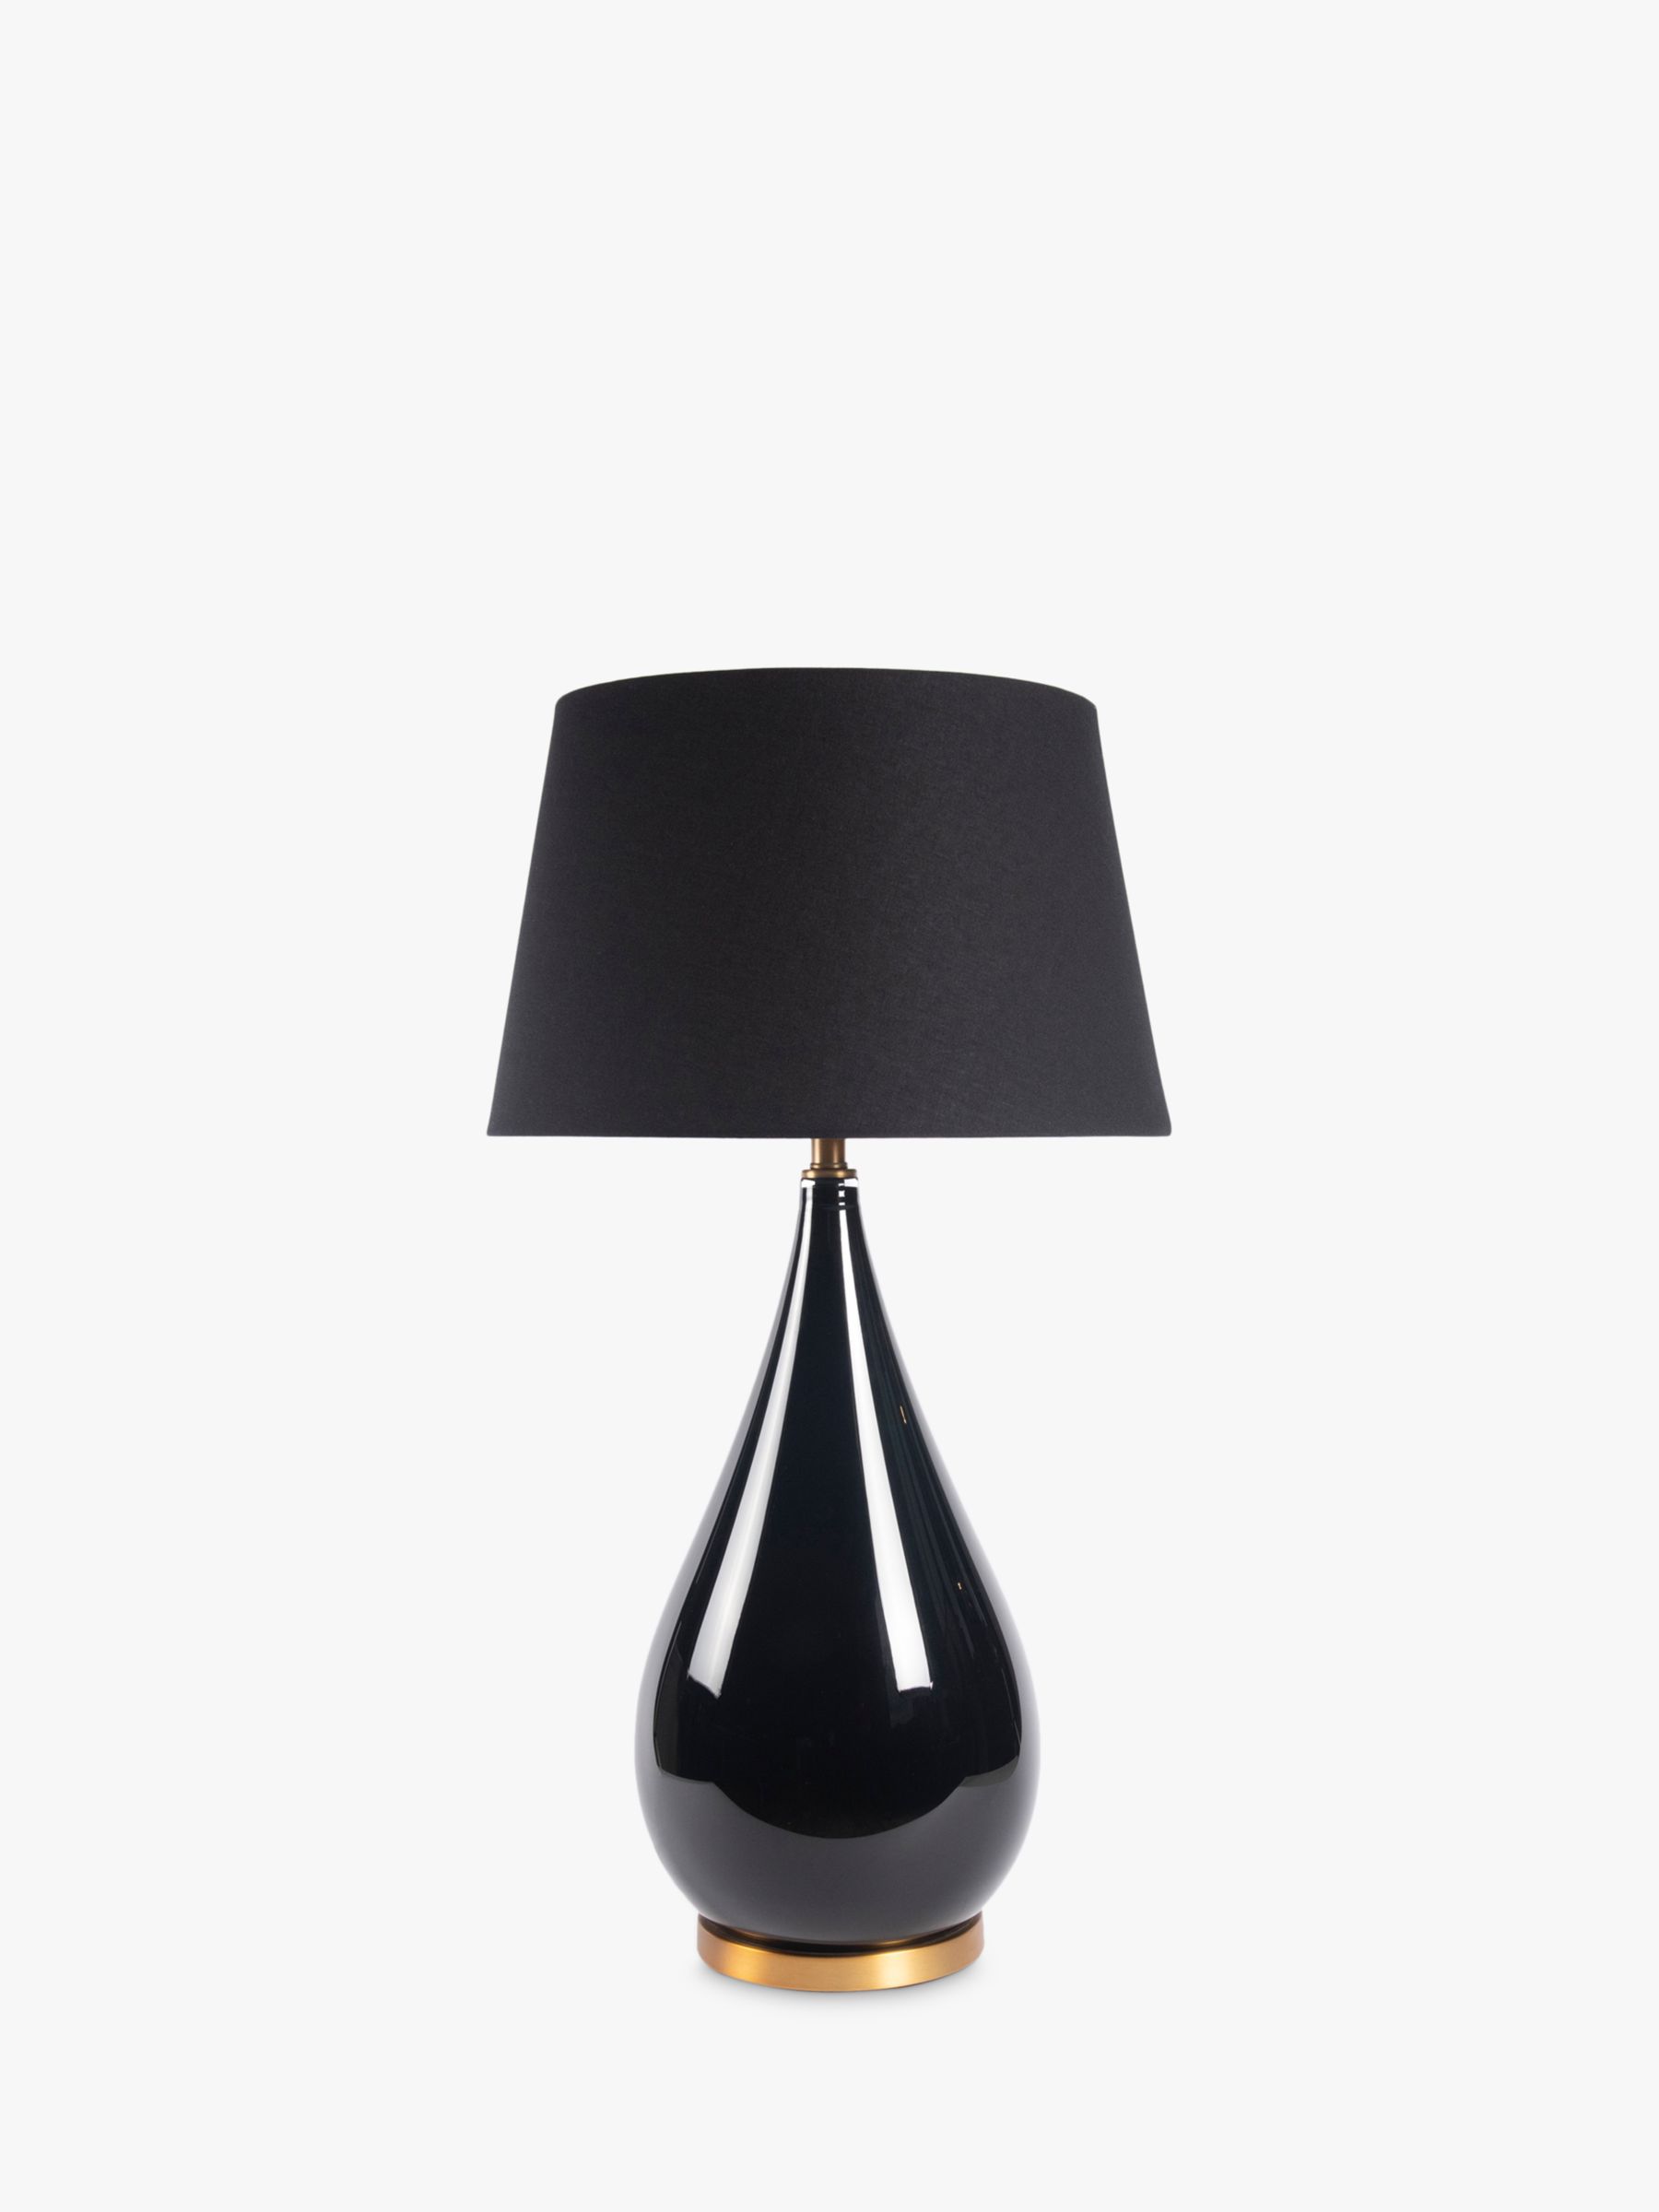 Photo of One.world clifton curved glass base linen shade table lamp black